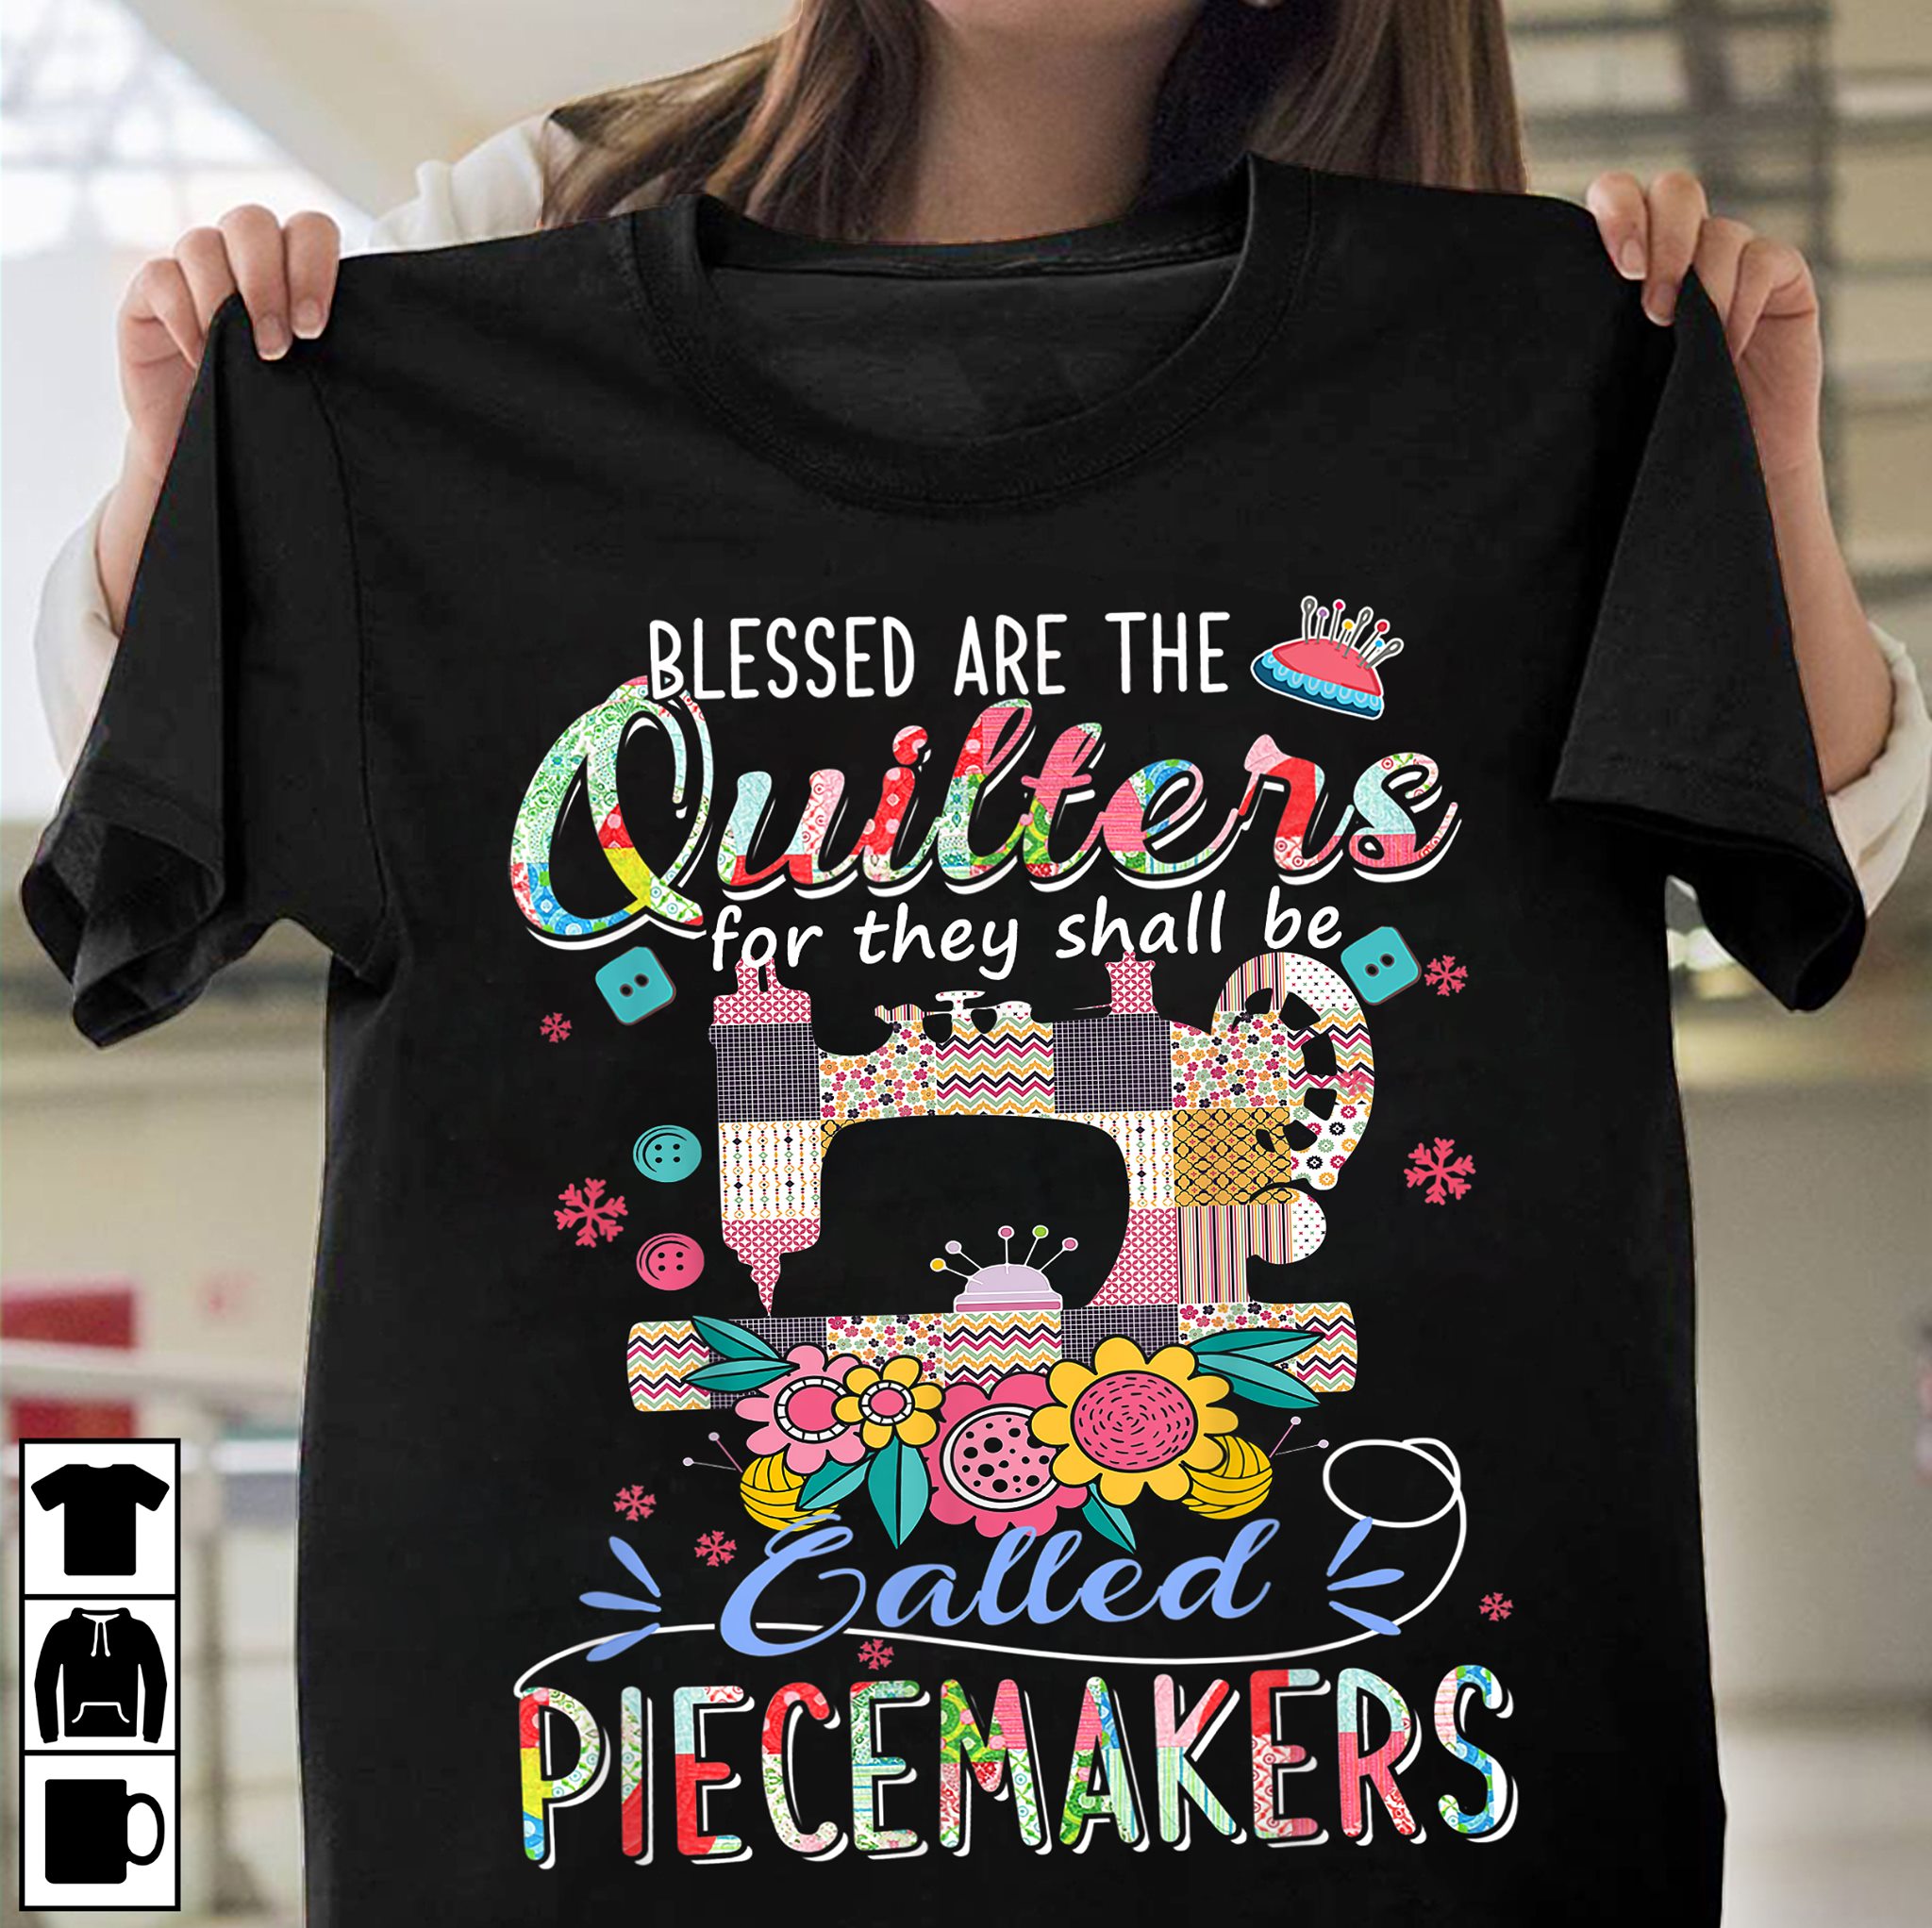 Blessed are the quilters for they shall be called Piecemakers